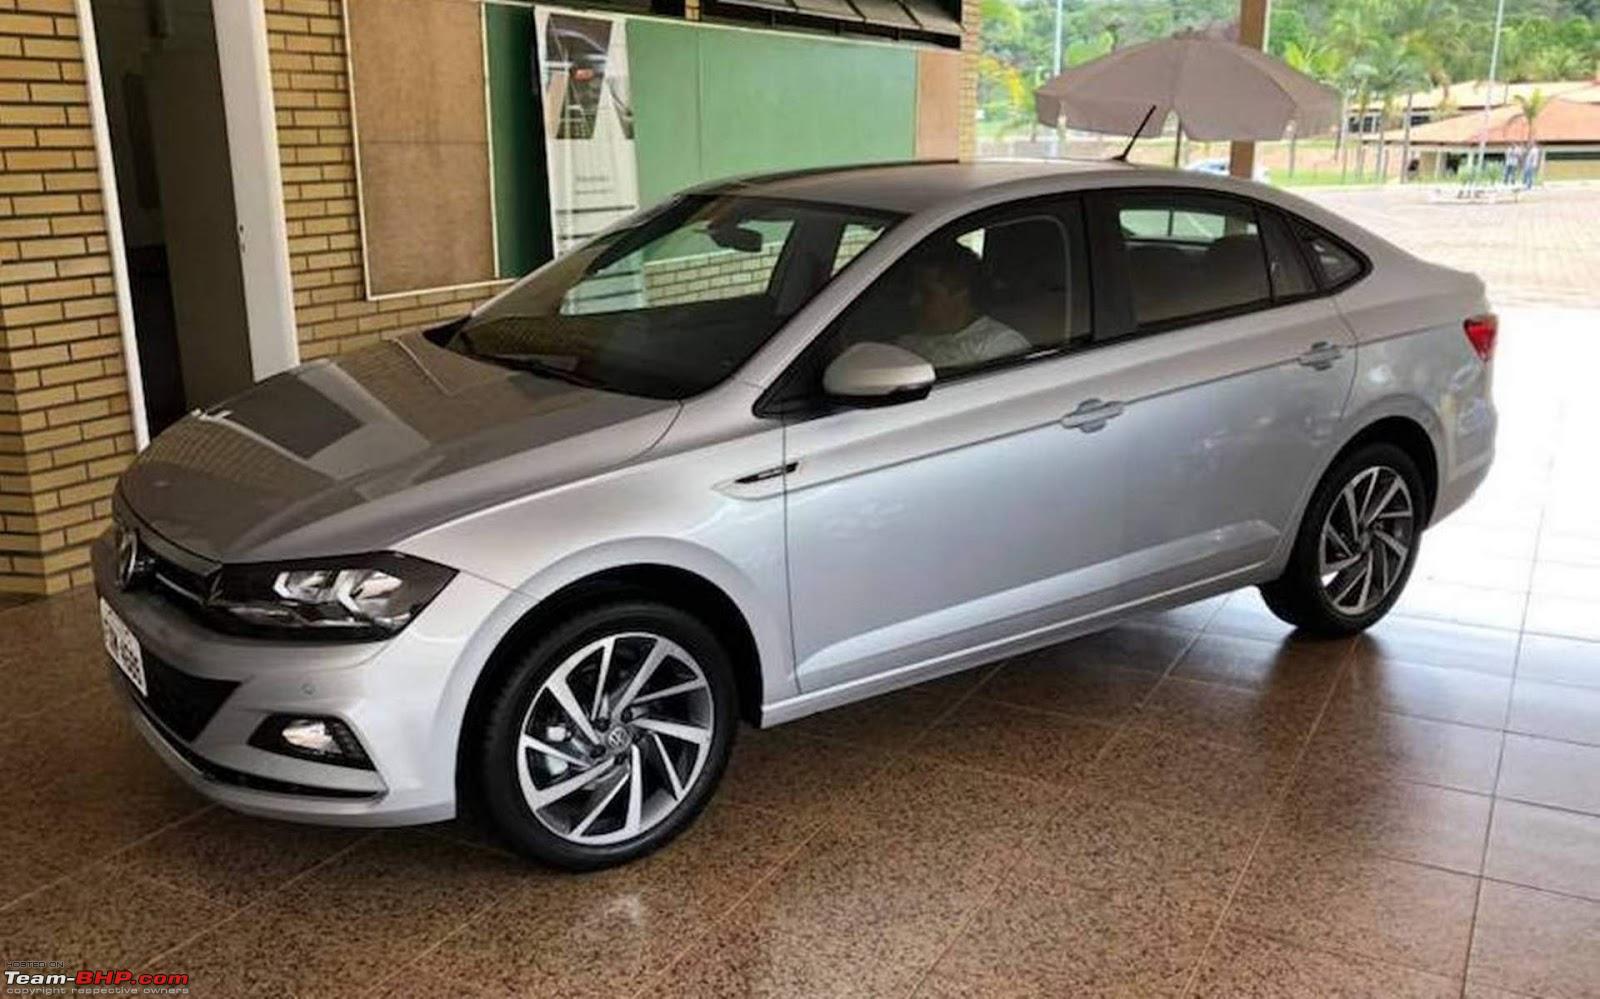 Car Pictures Review: Vw Polo Sedan 2020